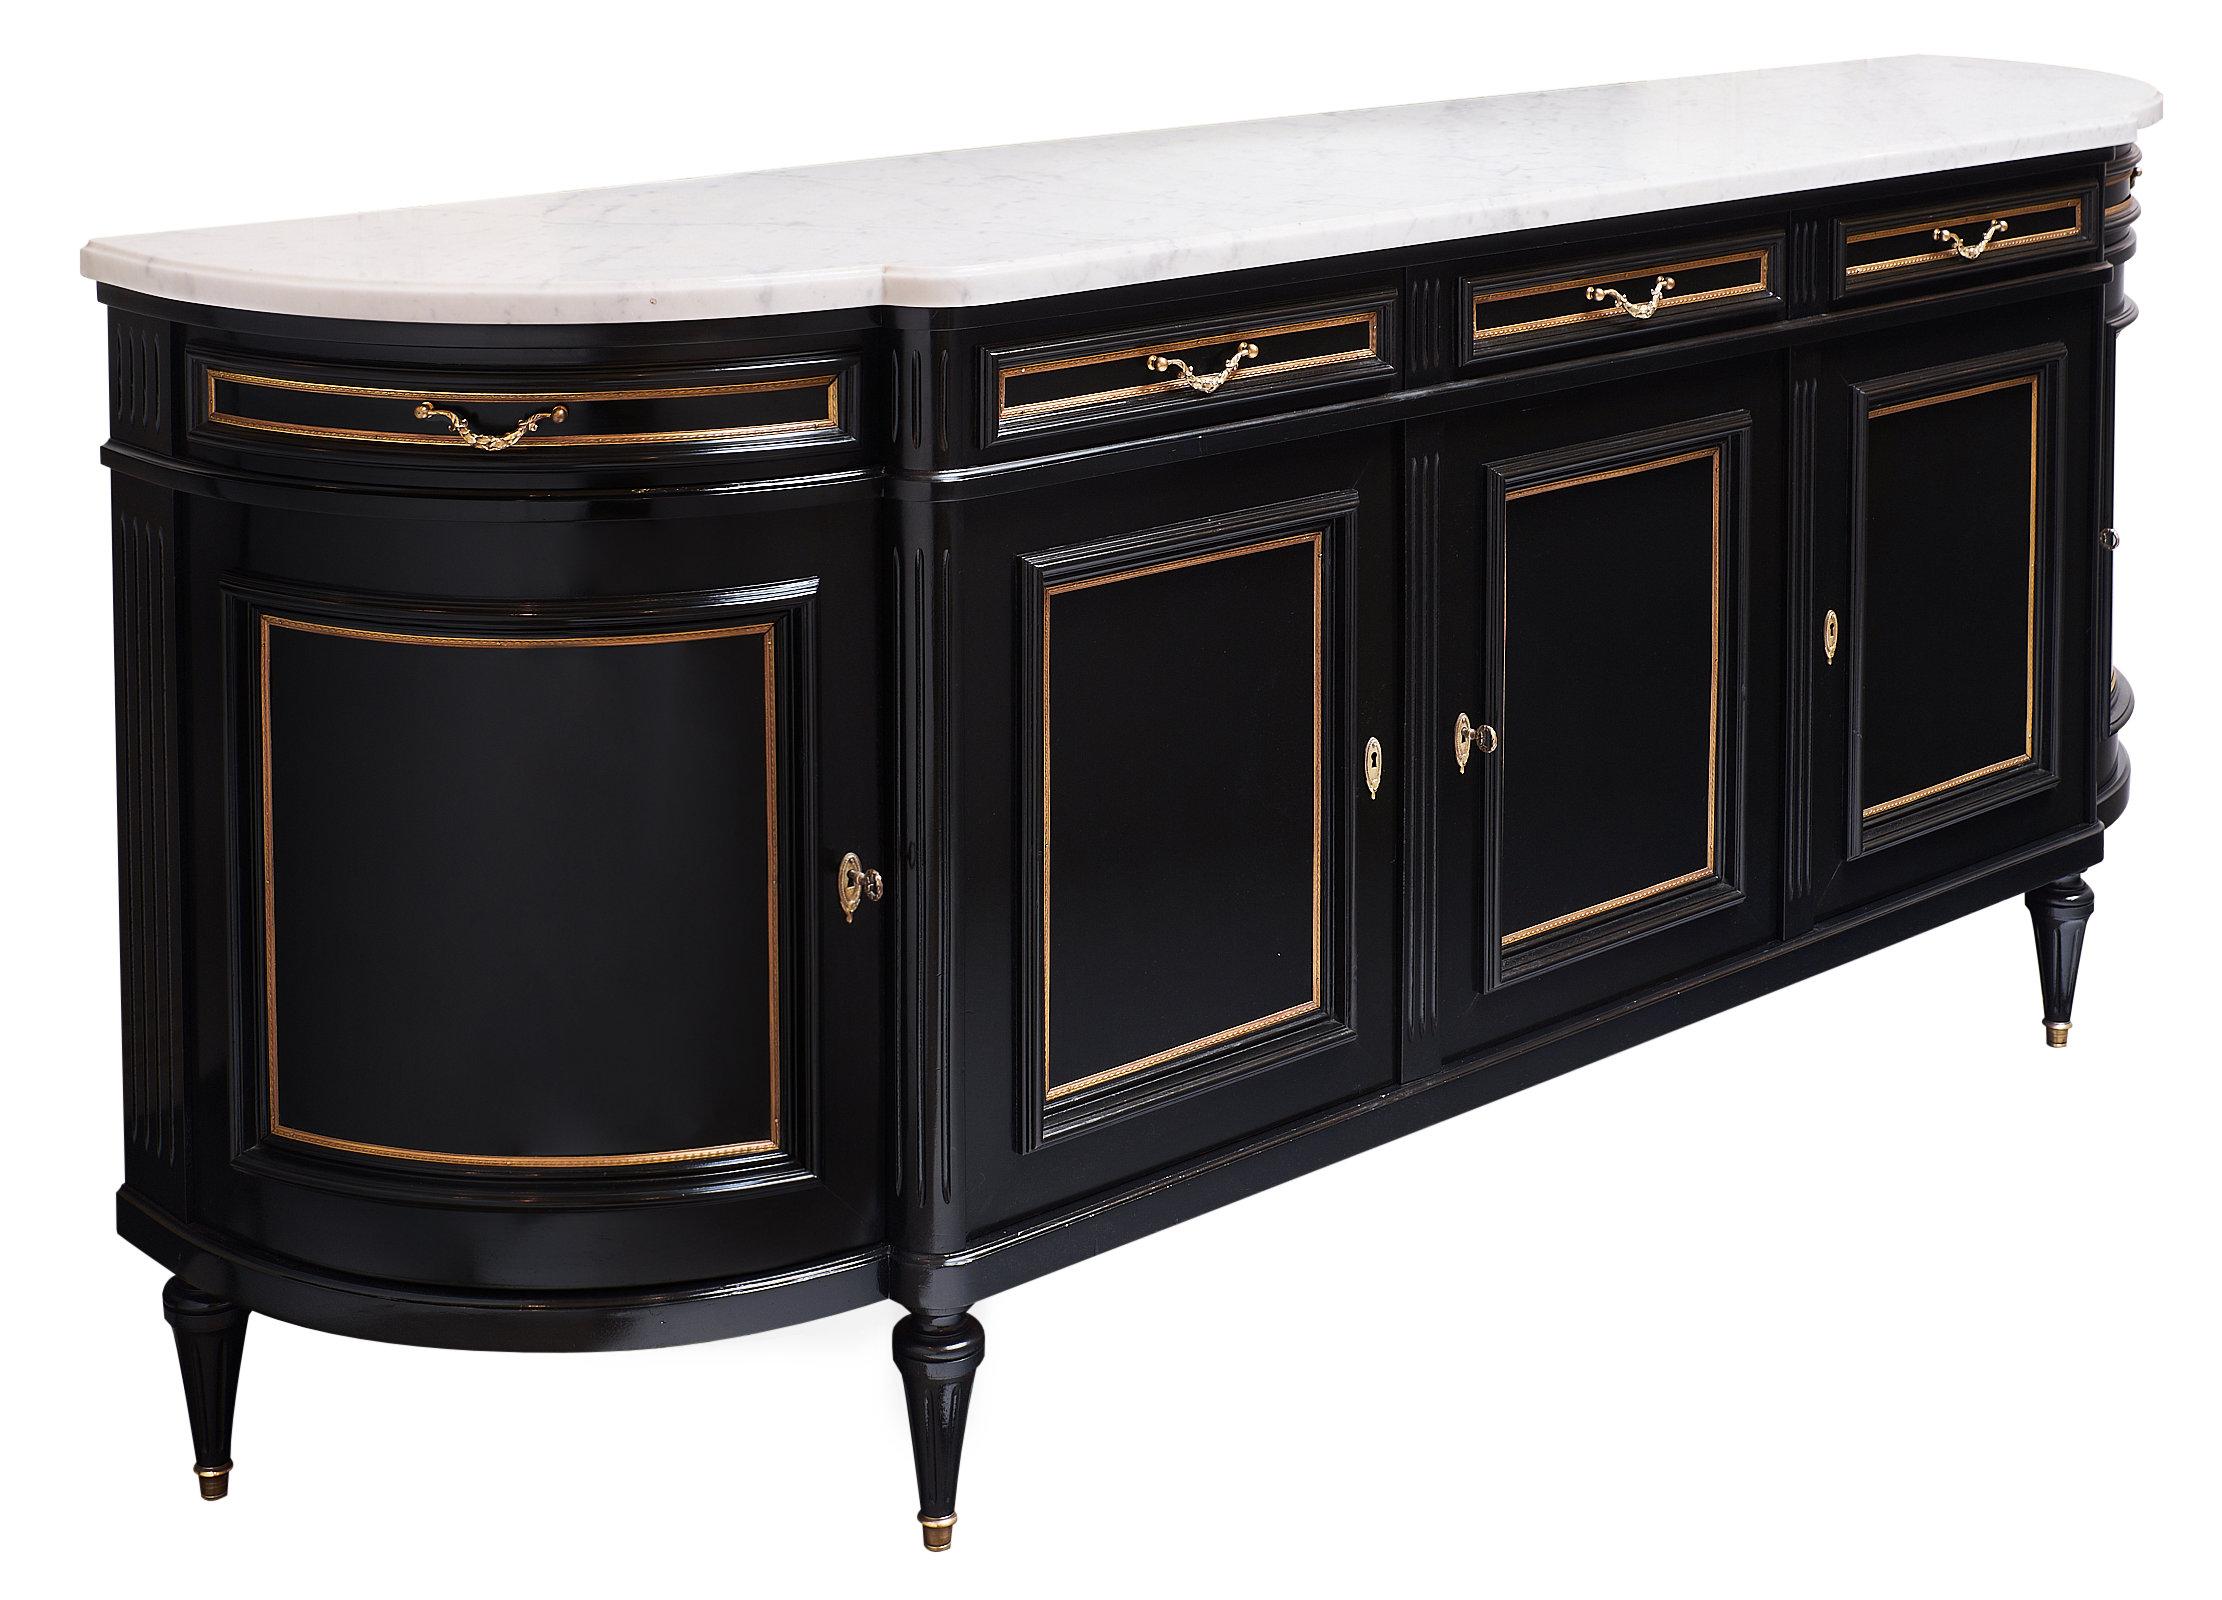 Beautiful French antique grande Louis XVI style buffet made of mahogany and featuring original brass hardware and trim. We love the intact Carrara marble top which adds elegance and a classic touch. This piece has been ebonized and finished with a